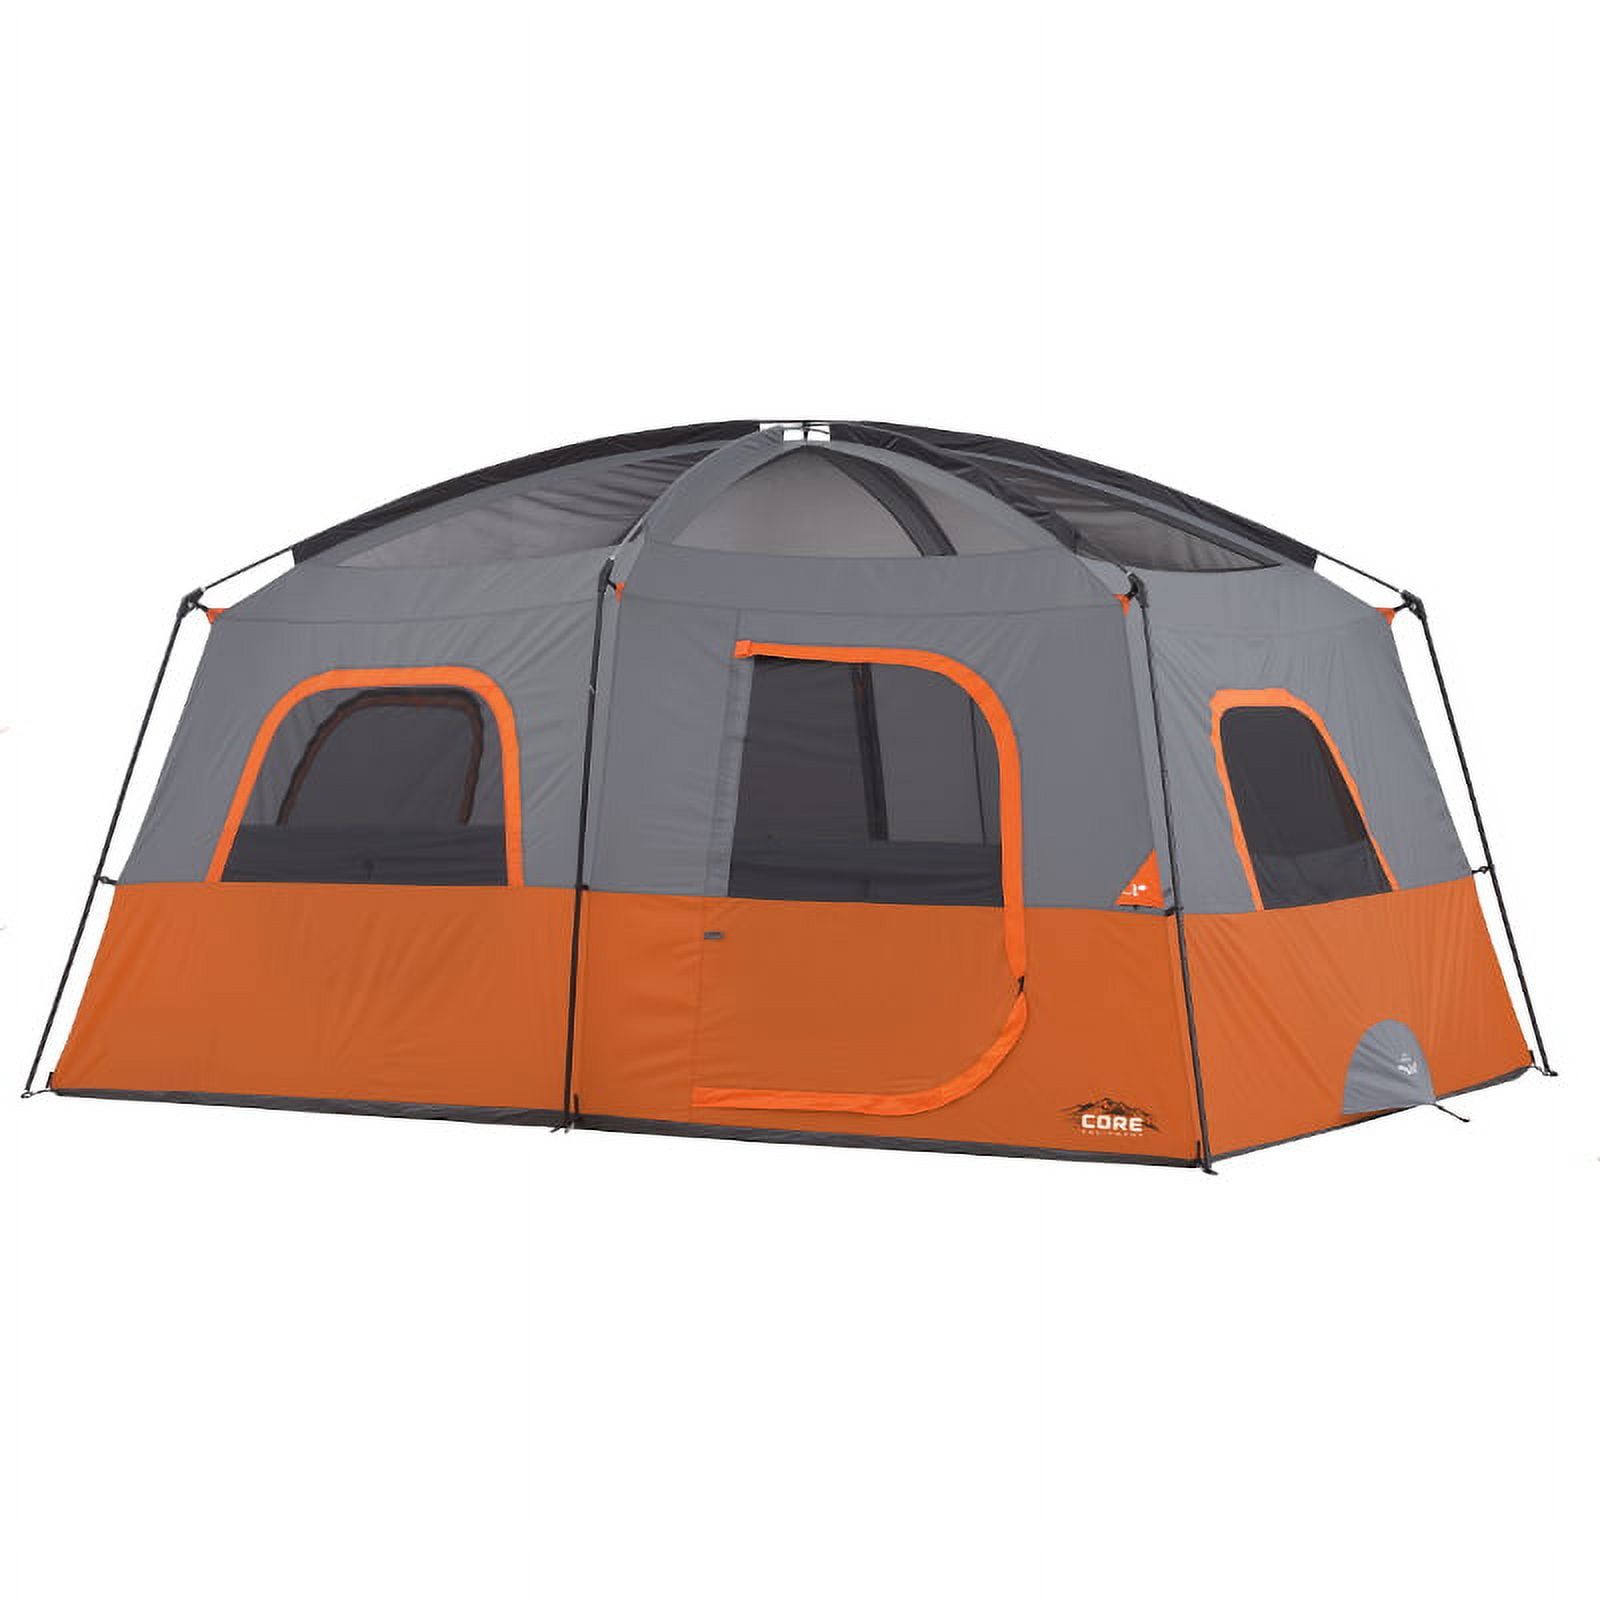 Core Equipment 10-Person 2-Room Straight Wall Cabin Camping Tent